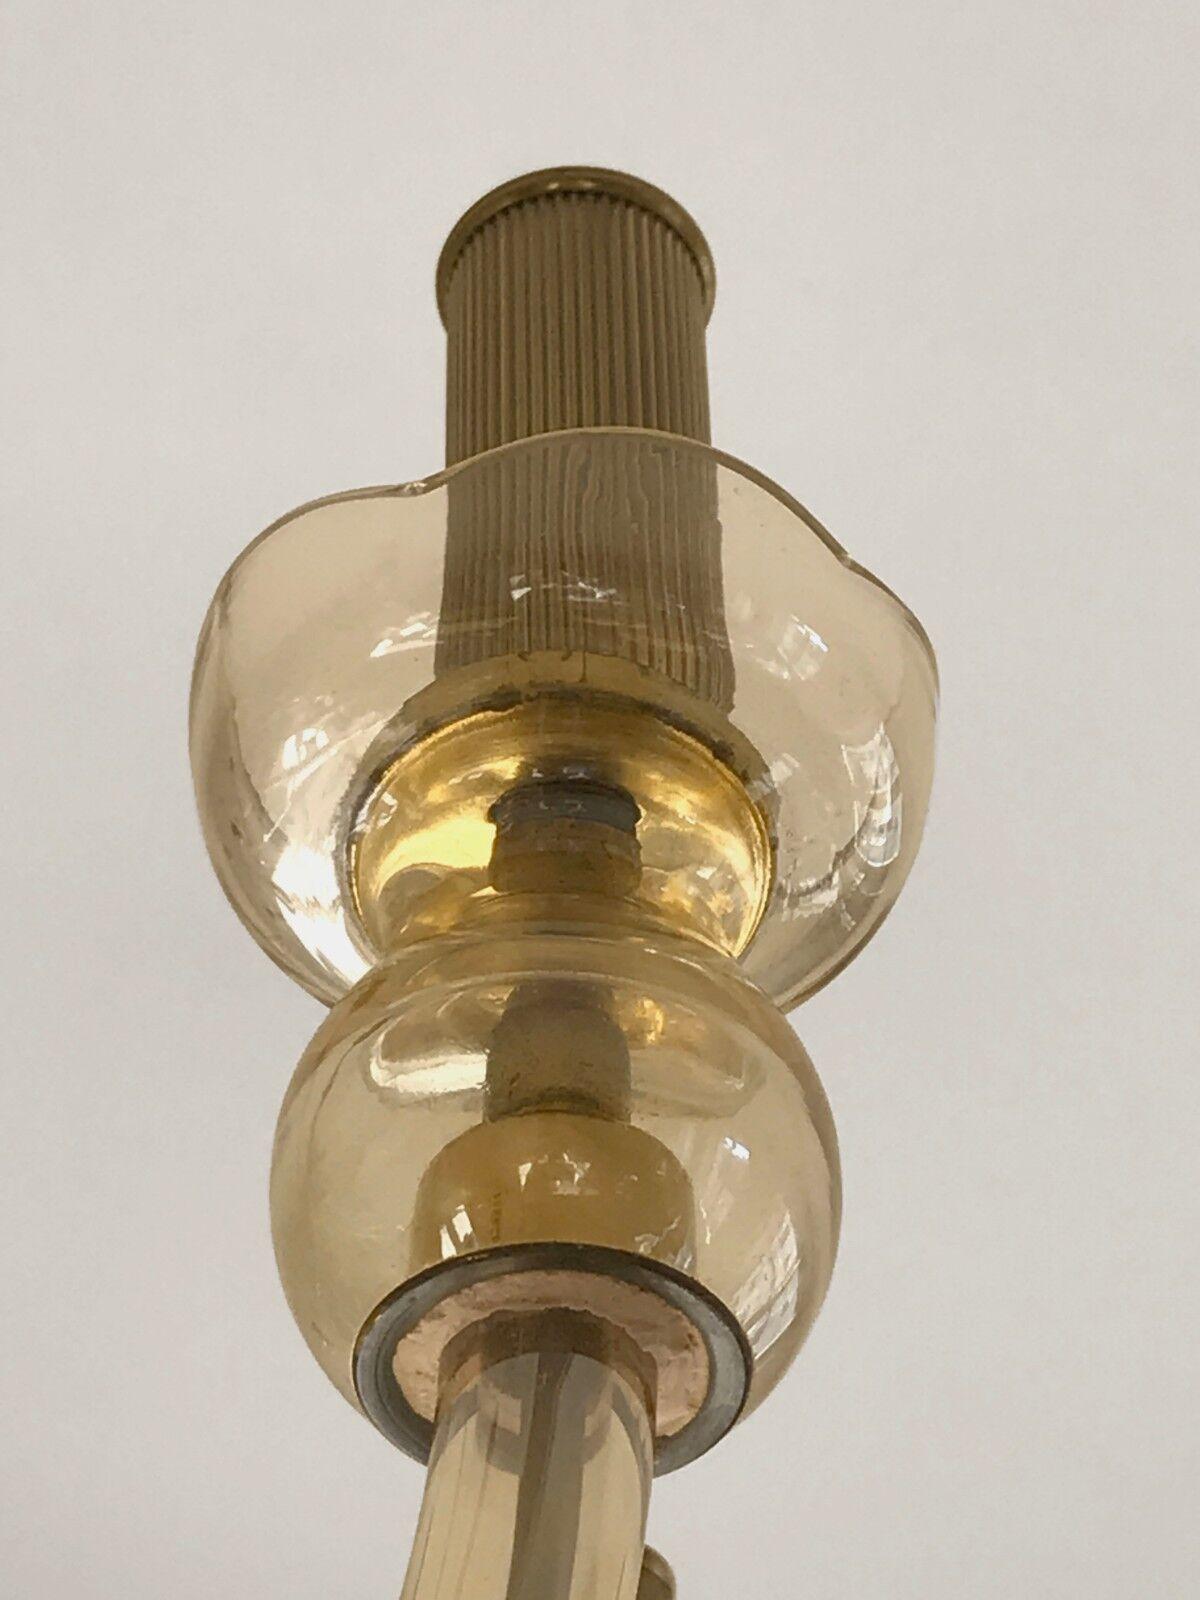 A Luxurious NEOCLASSICAL MURANO GLASS Ceiling Fixture by VERONESE, Italy, 1950 For Sale 1